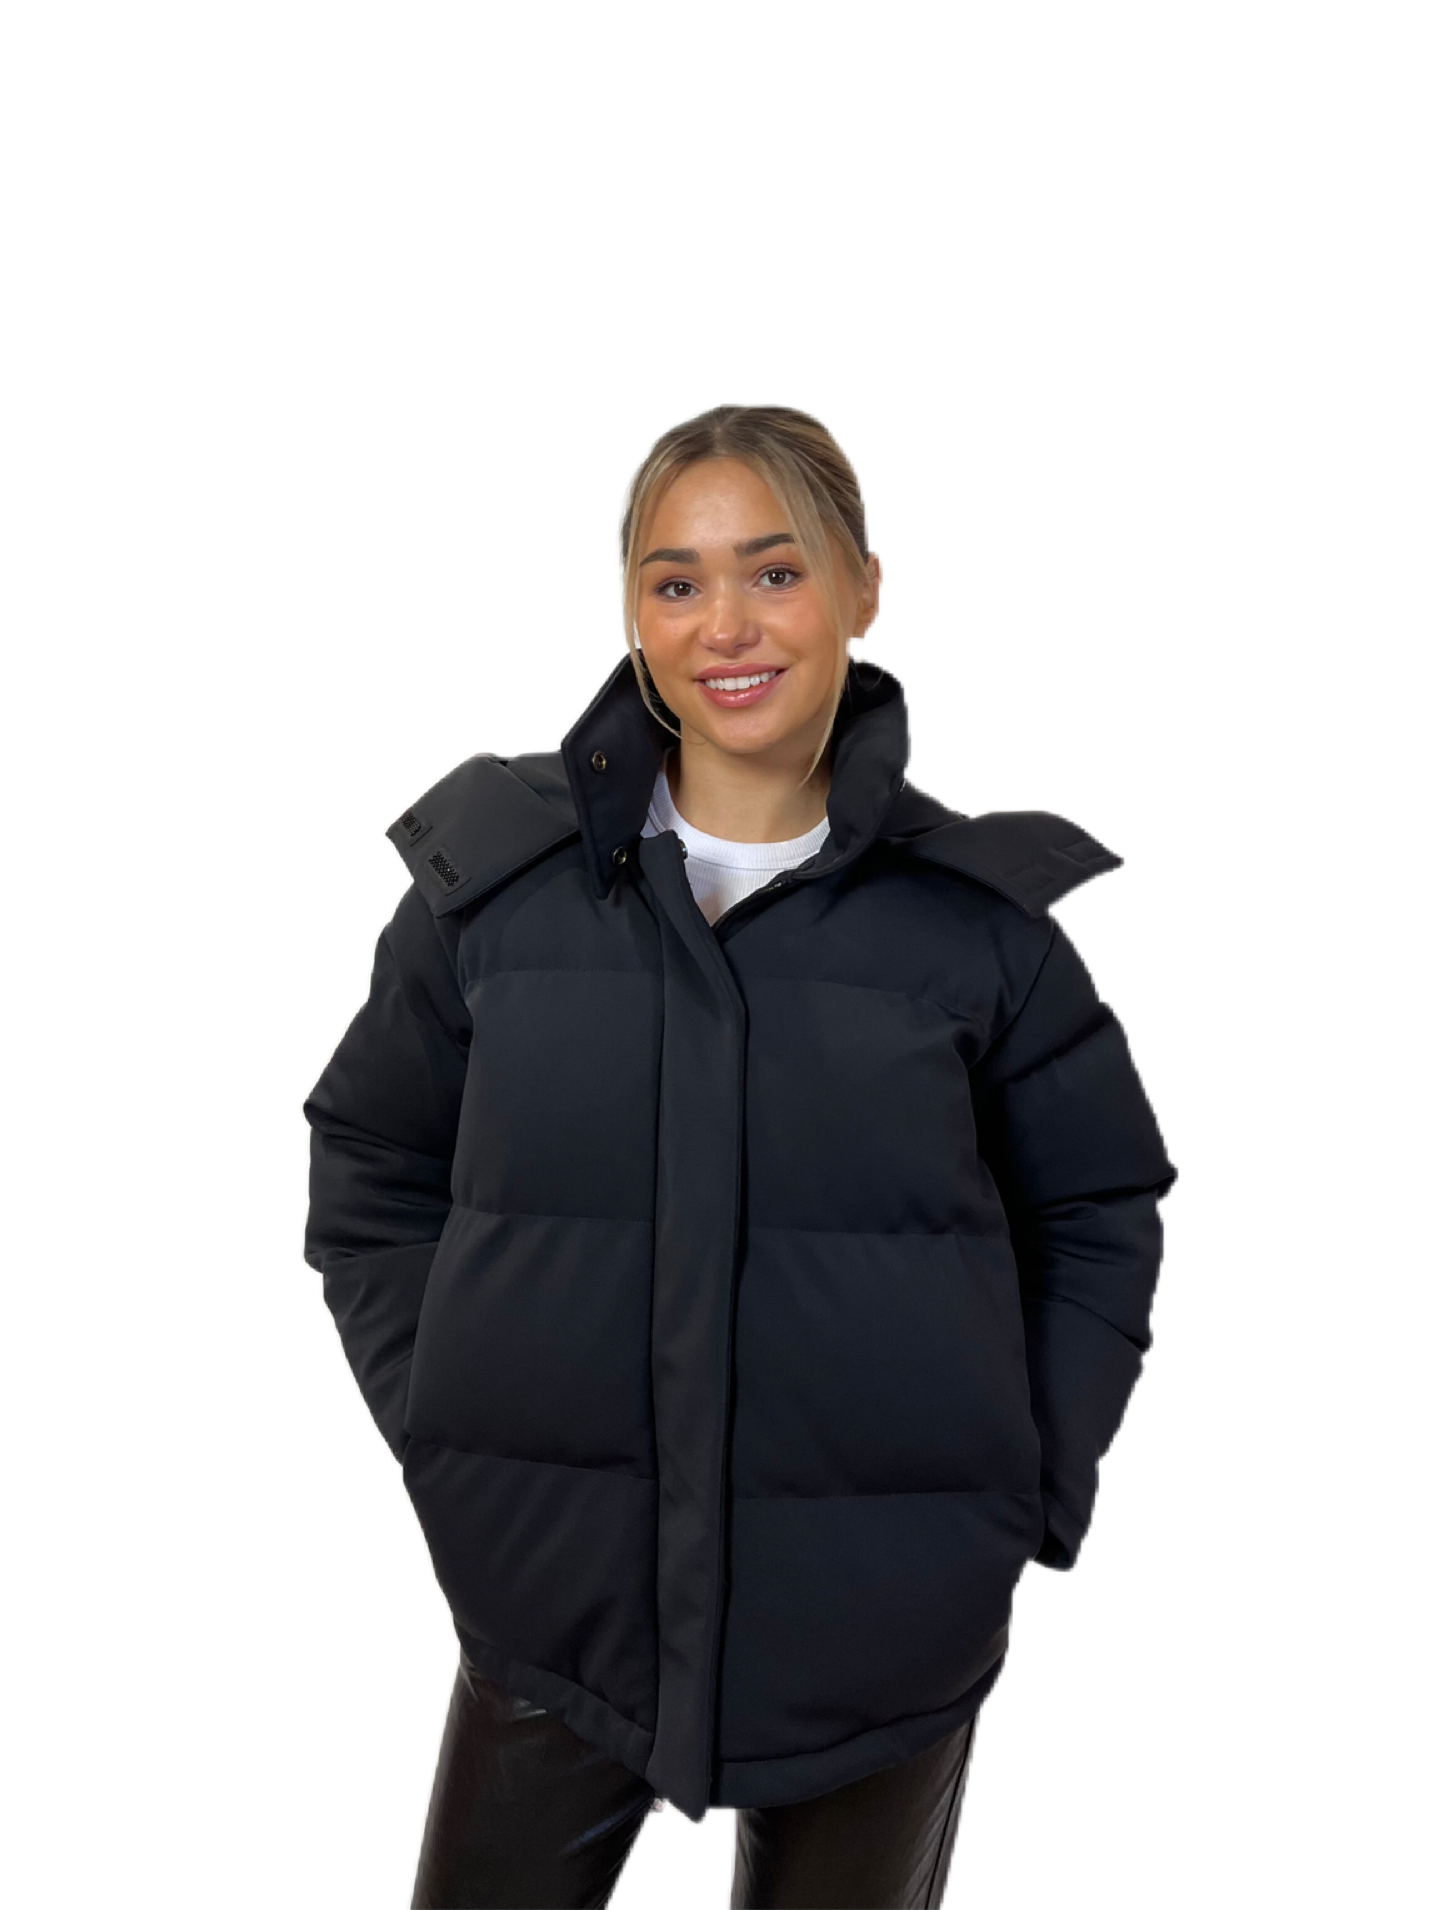 Camilla And Marc black Puffer Jacket. Size: XS/S